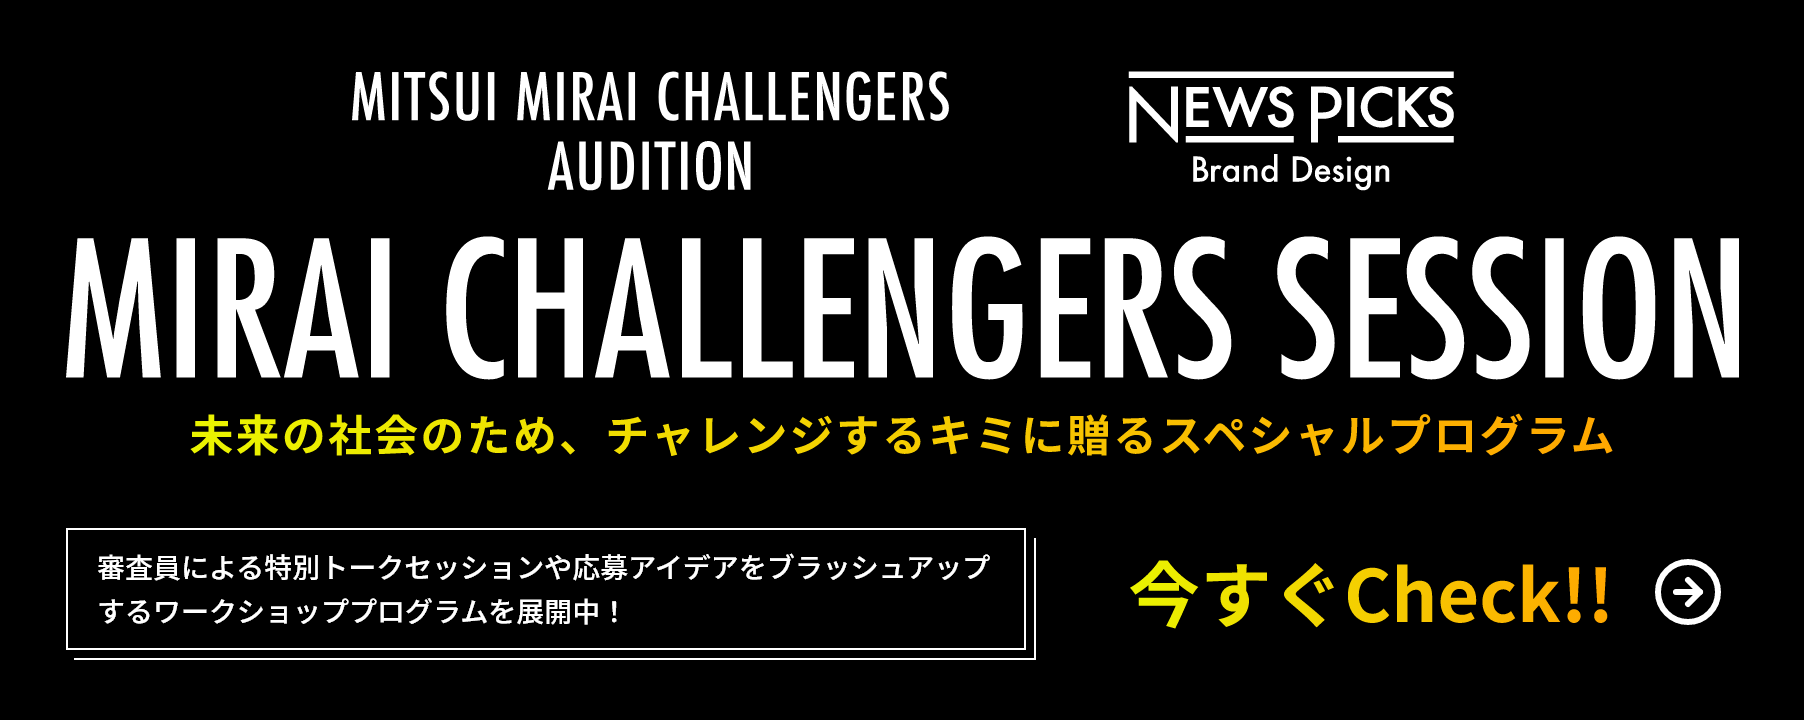 MIRAI CHALLENGERS SESSION 今すぐCheck！